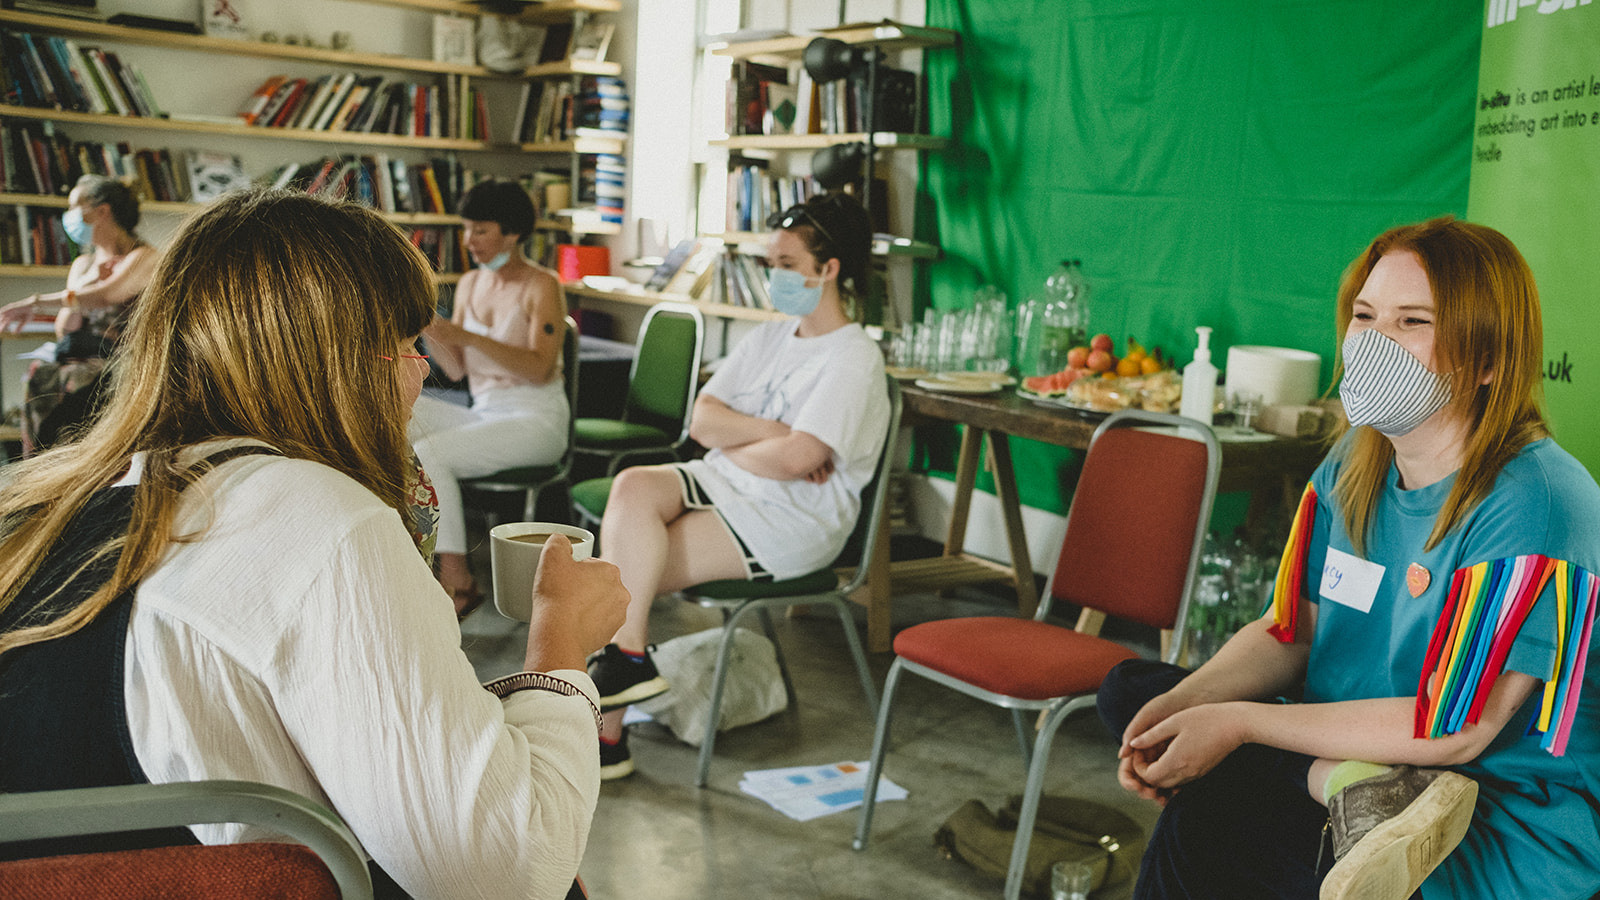 A number of women are seated in a room with vibrant green walls. They are chatting to one another and drinking cups of tea. Some of them are wearing protective face coverings.